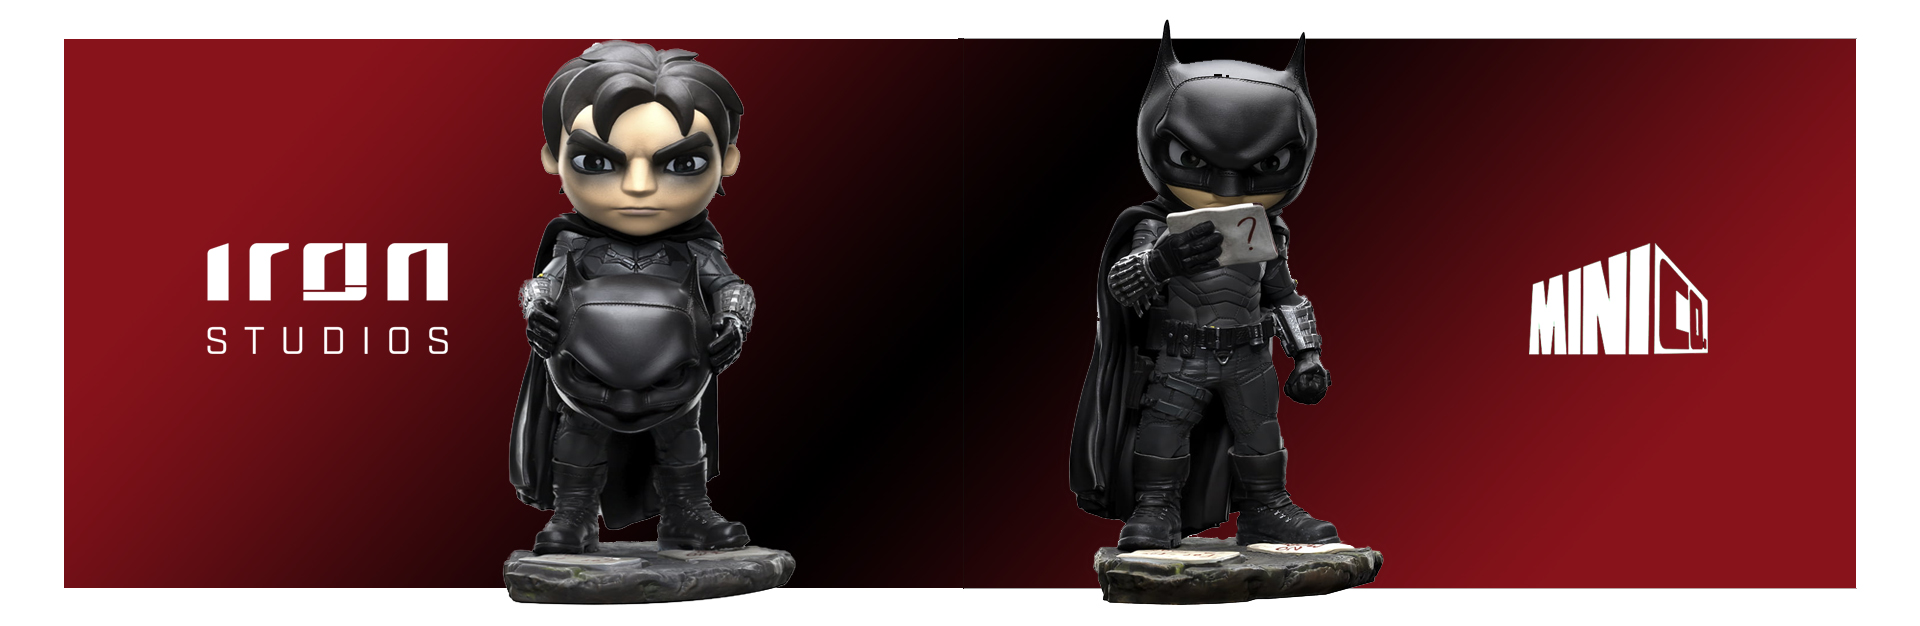 The Batman Unmasked and Masked Version Mini Figure